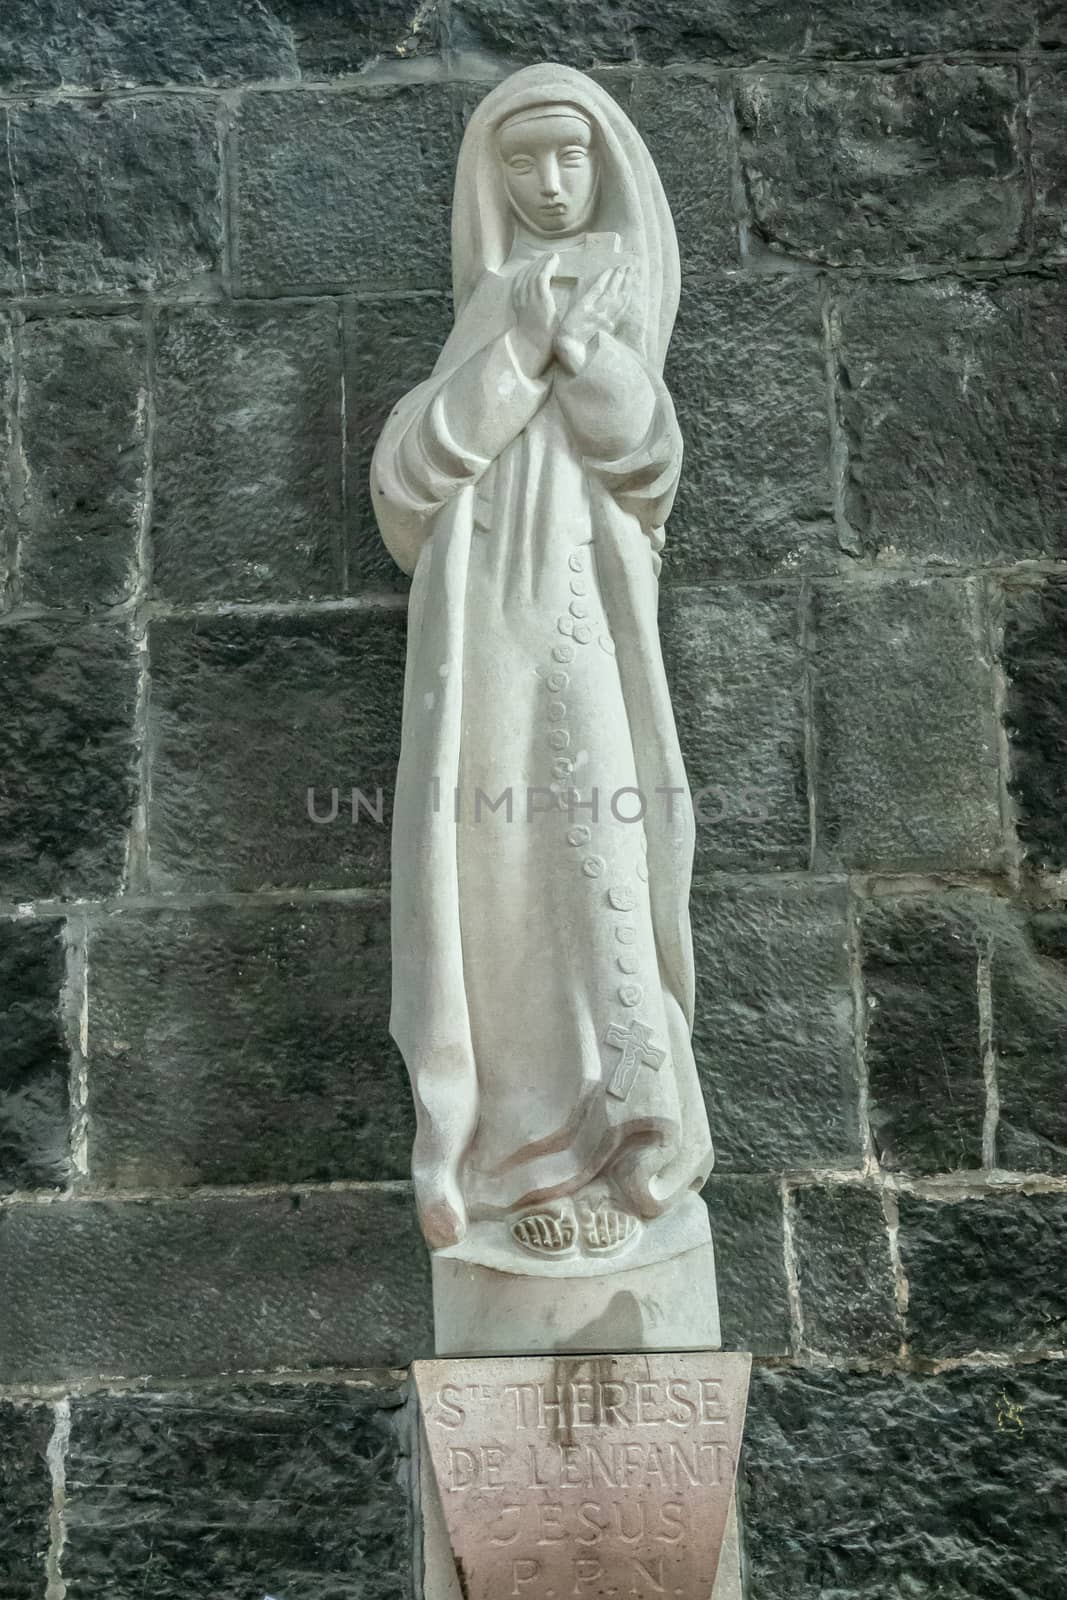 Dinant, Belgium - June 26, 2019: Inside Collégiale Notre Dame de Dinant Church. Modern style white stone statue of Sainte Therese of the child Jesus against gray stone church wall.